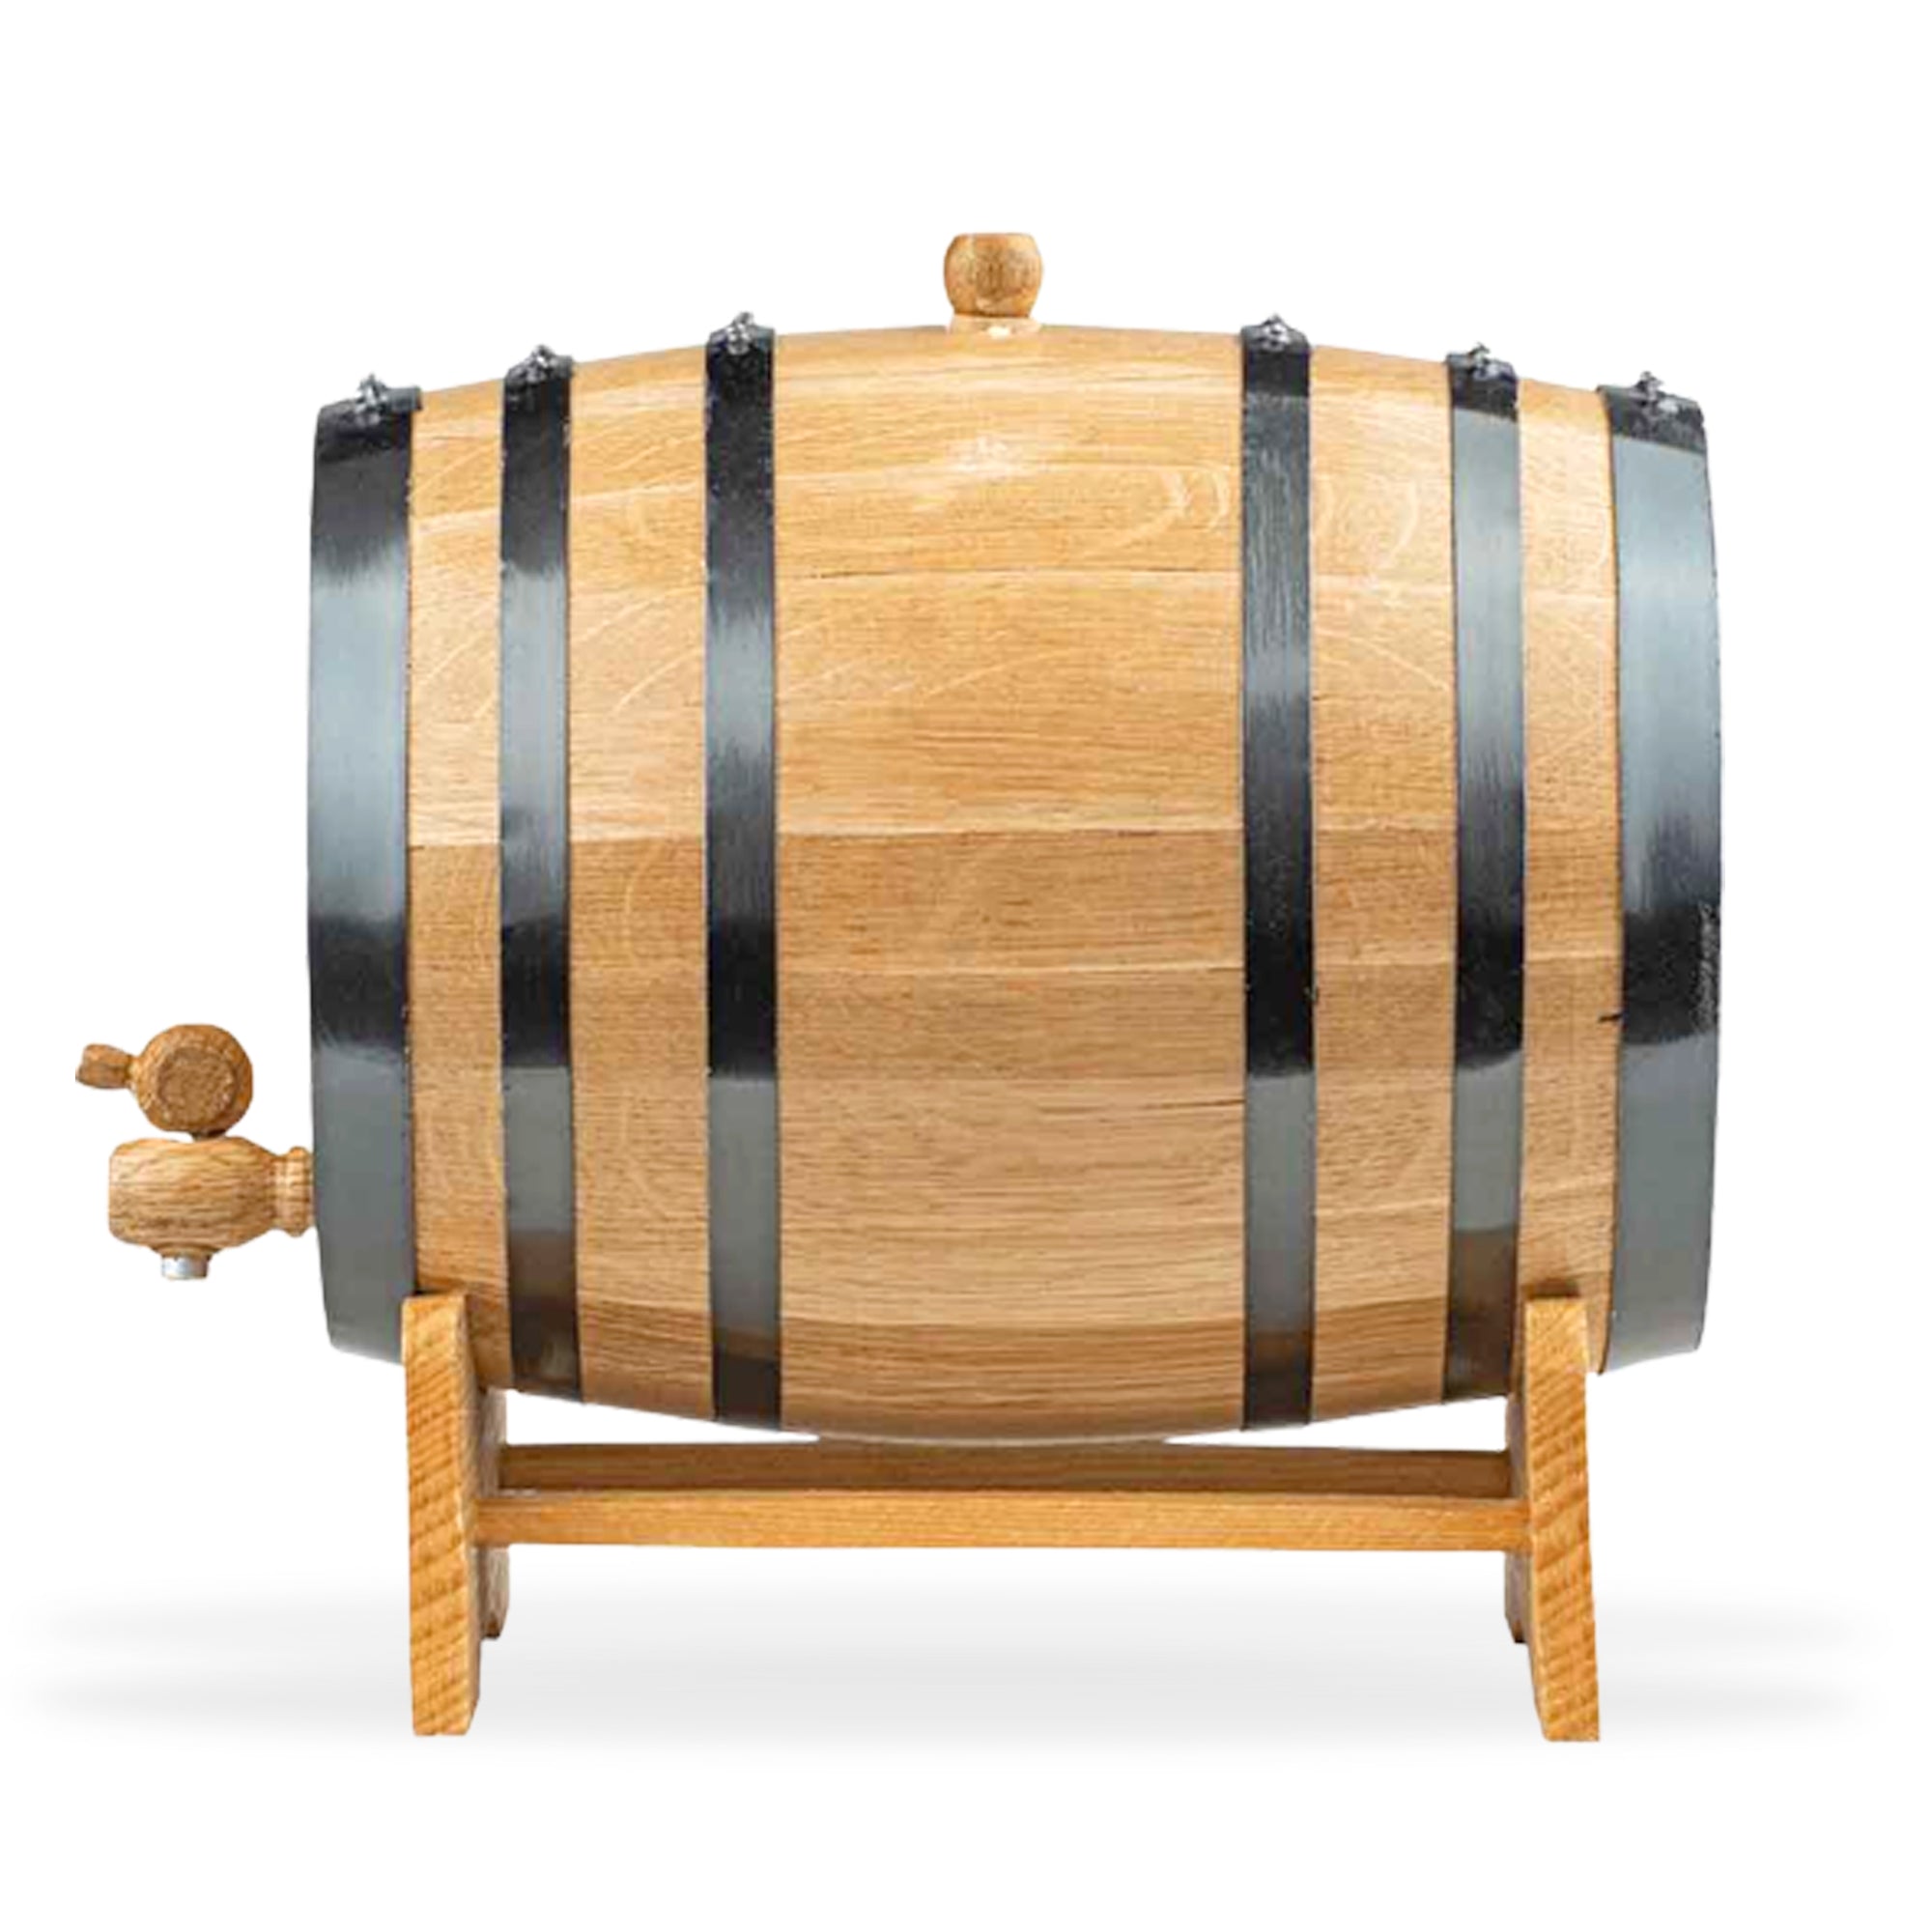 Personalized Tequila Barrel for Aging Tequila and Spirits | Distilling Co. Series - Blind Pig Drinking Co.